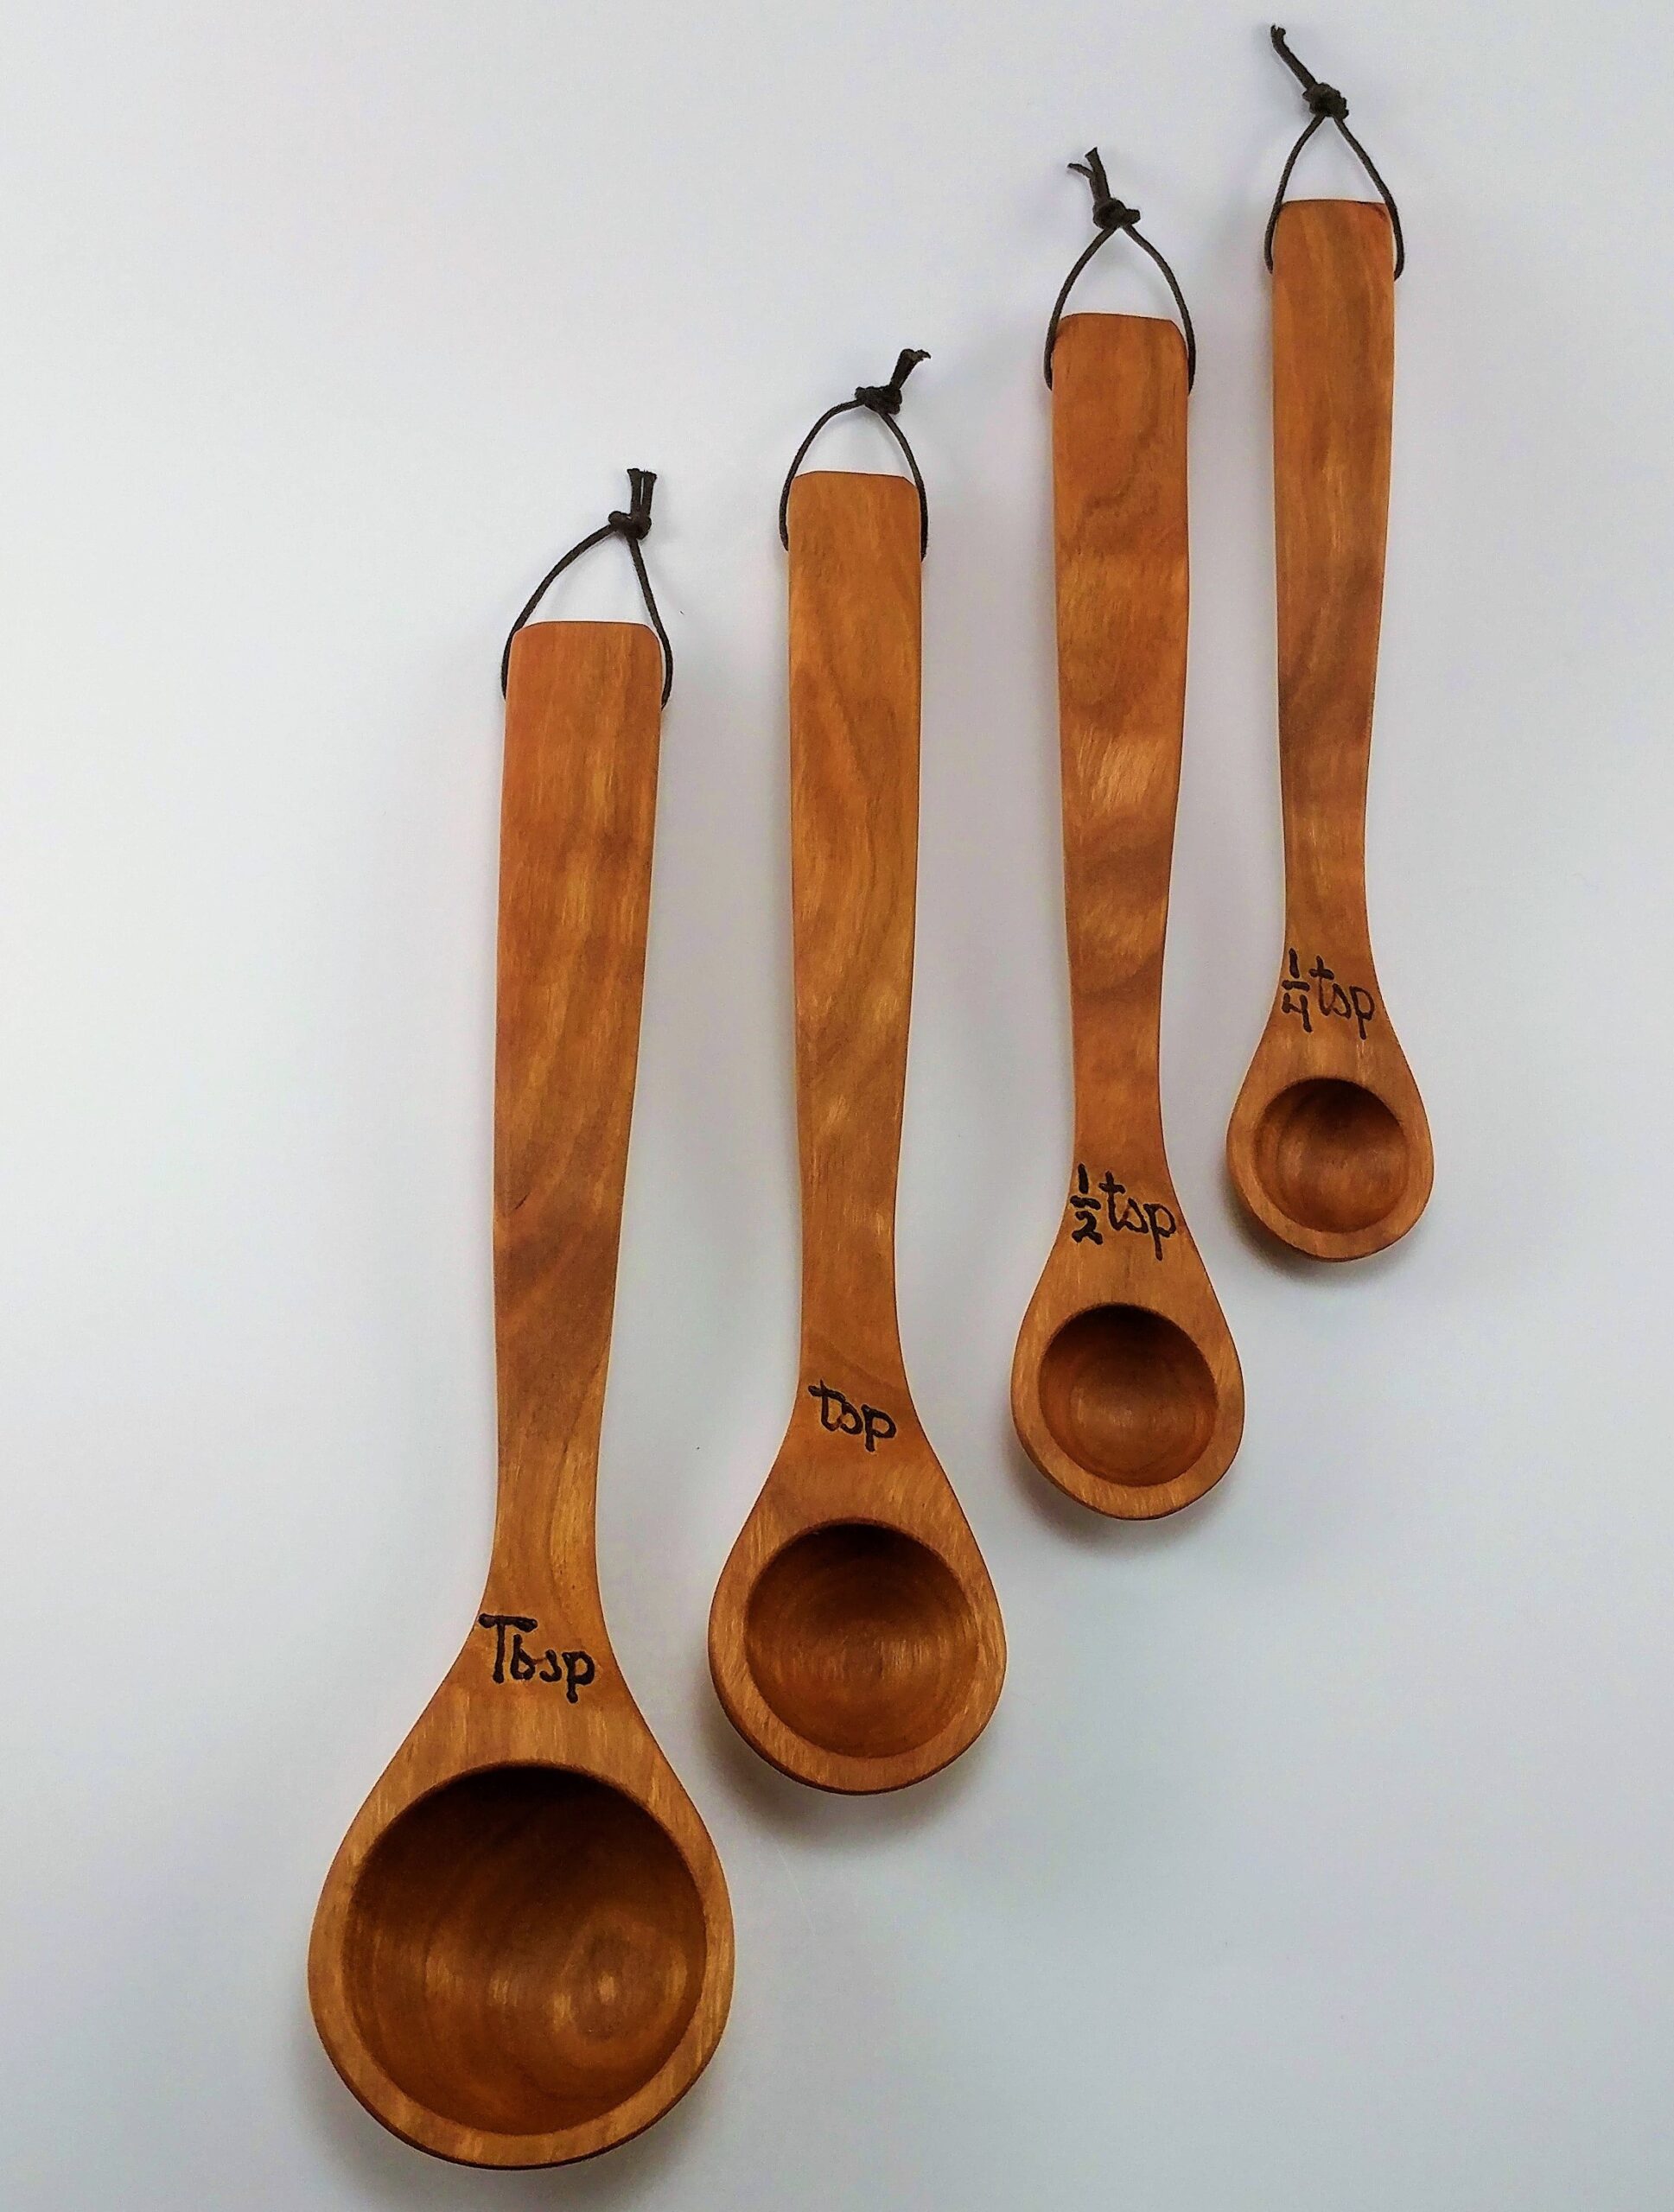 9 inch Long-Handled Measuring Spoons (4)